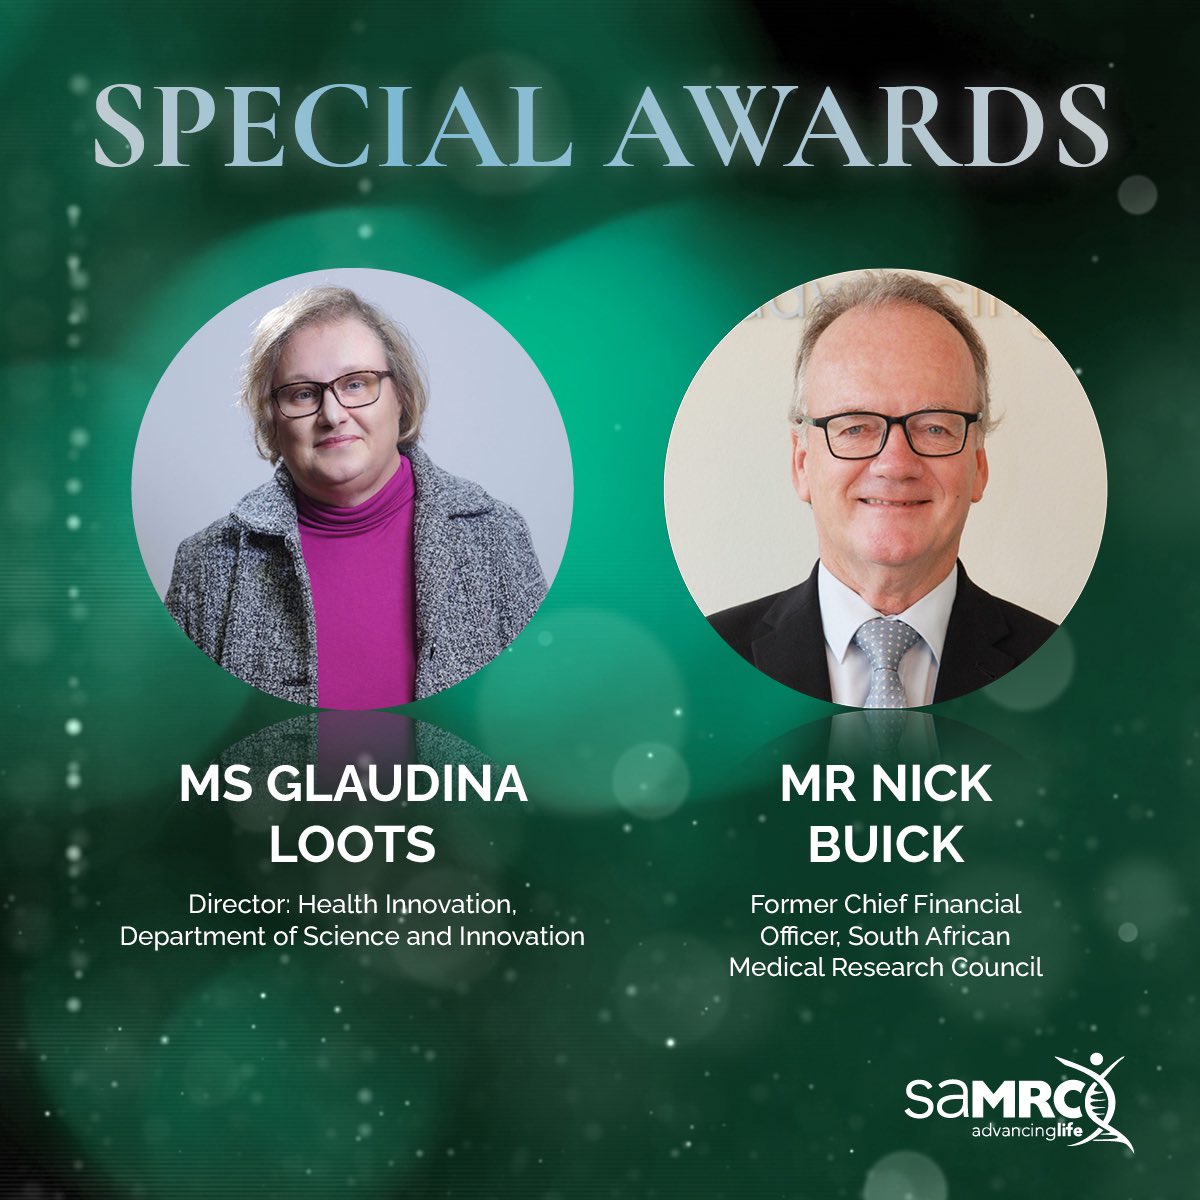 Awarded under the category 'Special Awards' were Ms Glaudina Loots and Mr Nick Buick. Under the leadership of Mr Buick annual funding doubled by 2019/20. Ms Loots was instrumental in the creation of the Strategic Health Innovation Partnership Initiative (SHIP) at the SAMRC.